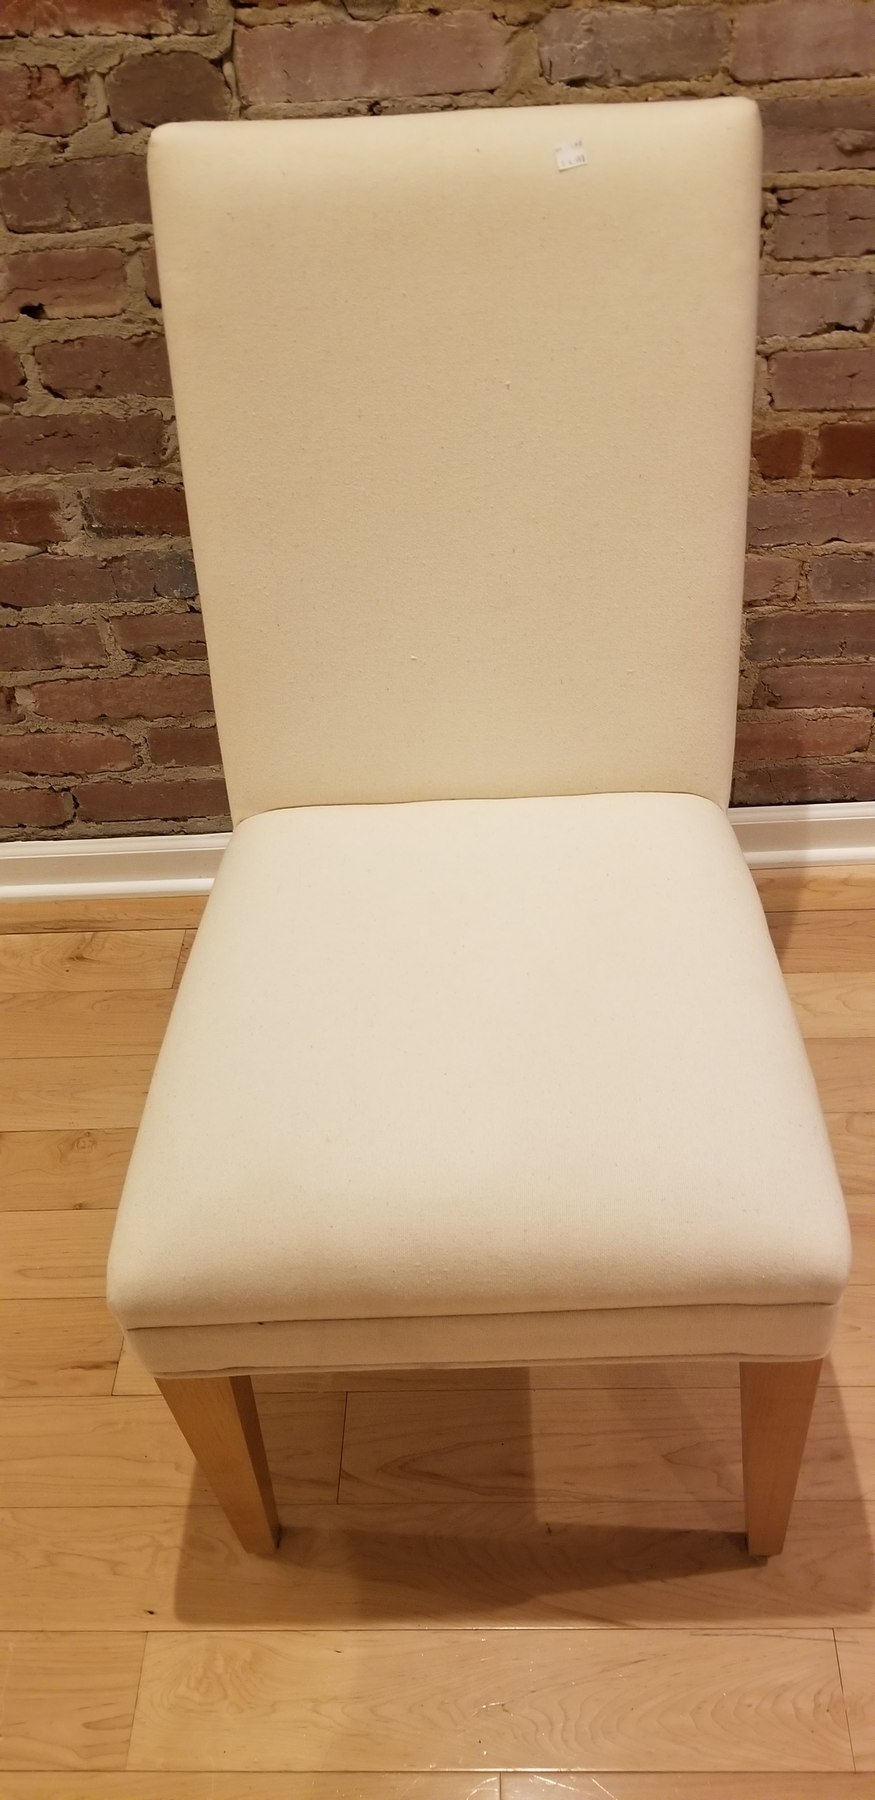 Ariel's Mitchell Gold parson chair found at Goodwill